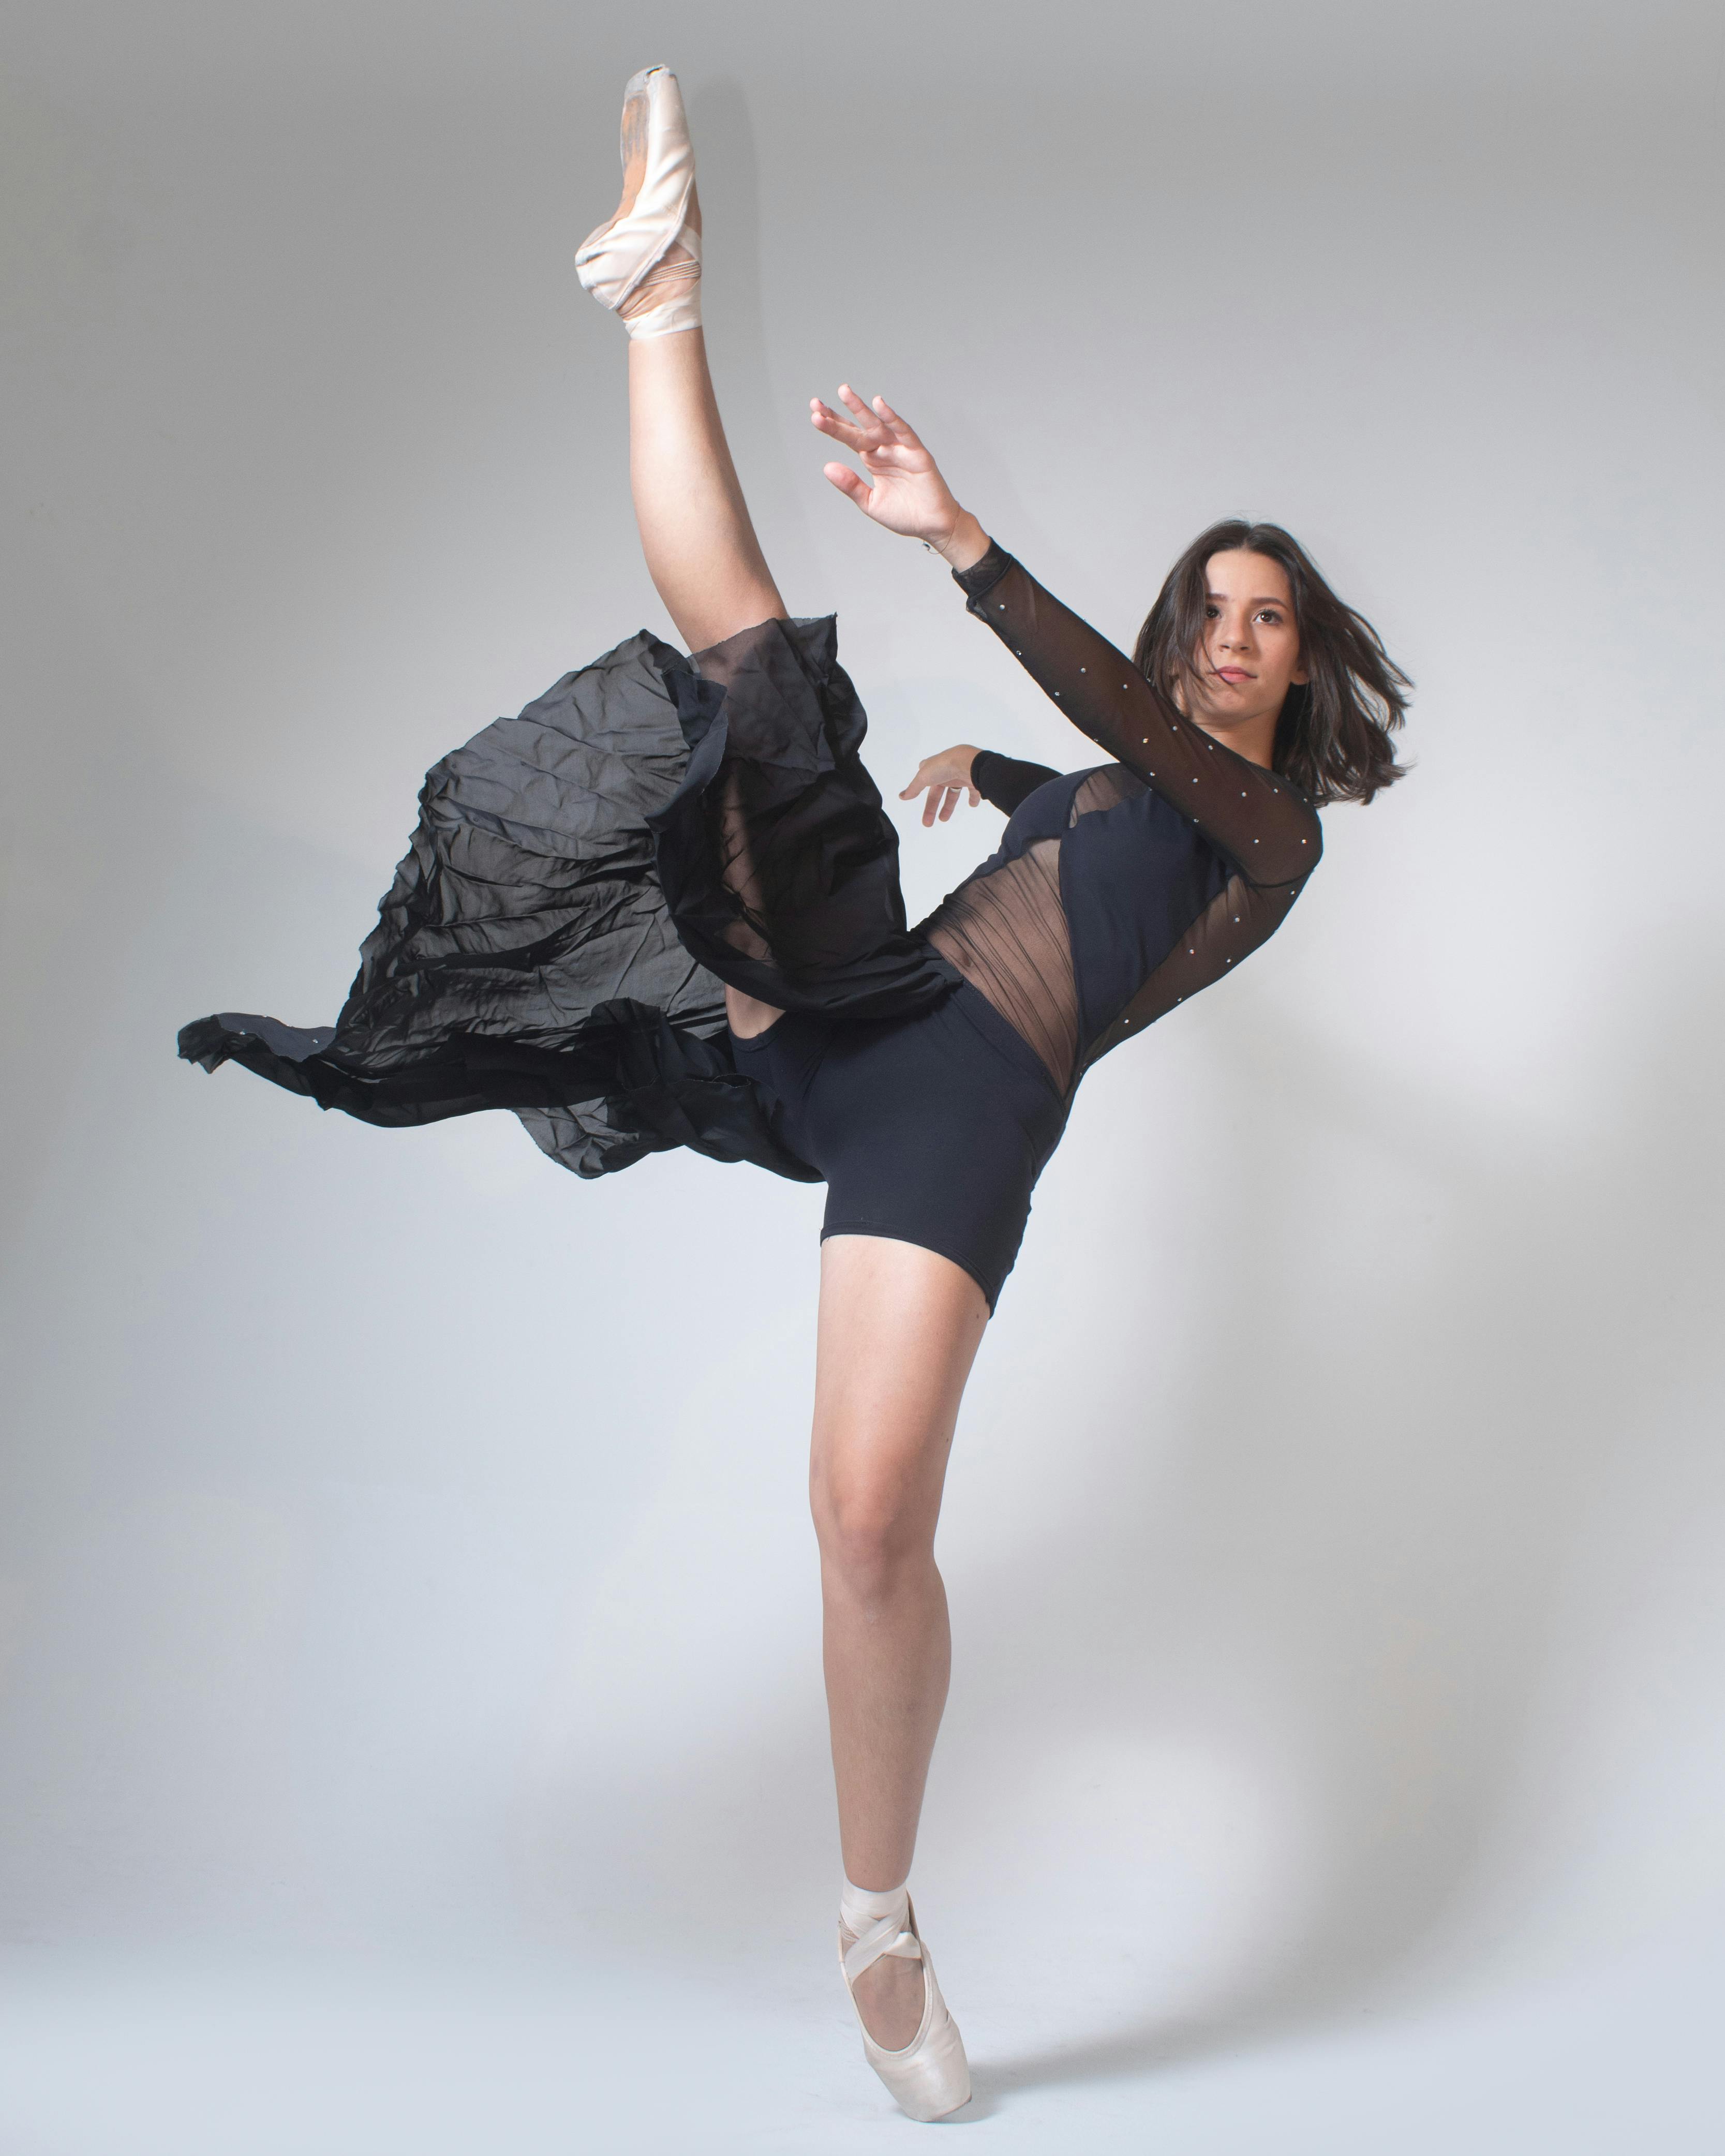 Best Ballet Photography Poses and Tips